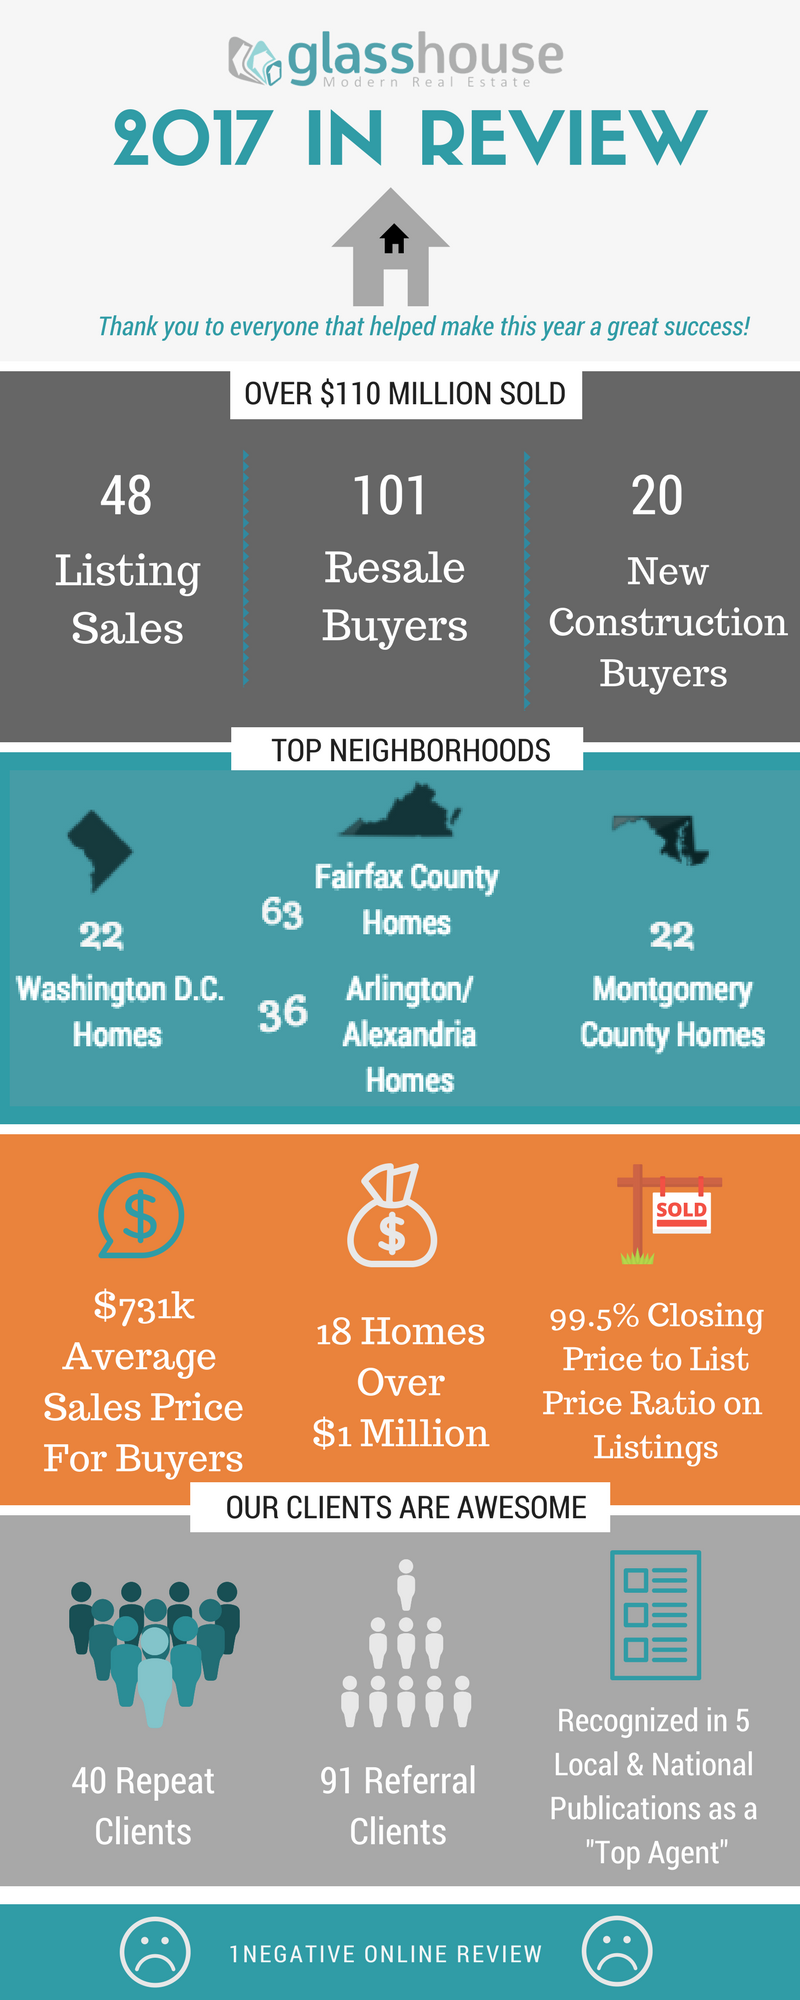 Glass House Real Estate 2017 In Review [INFOGRAPHIC]